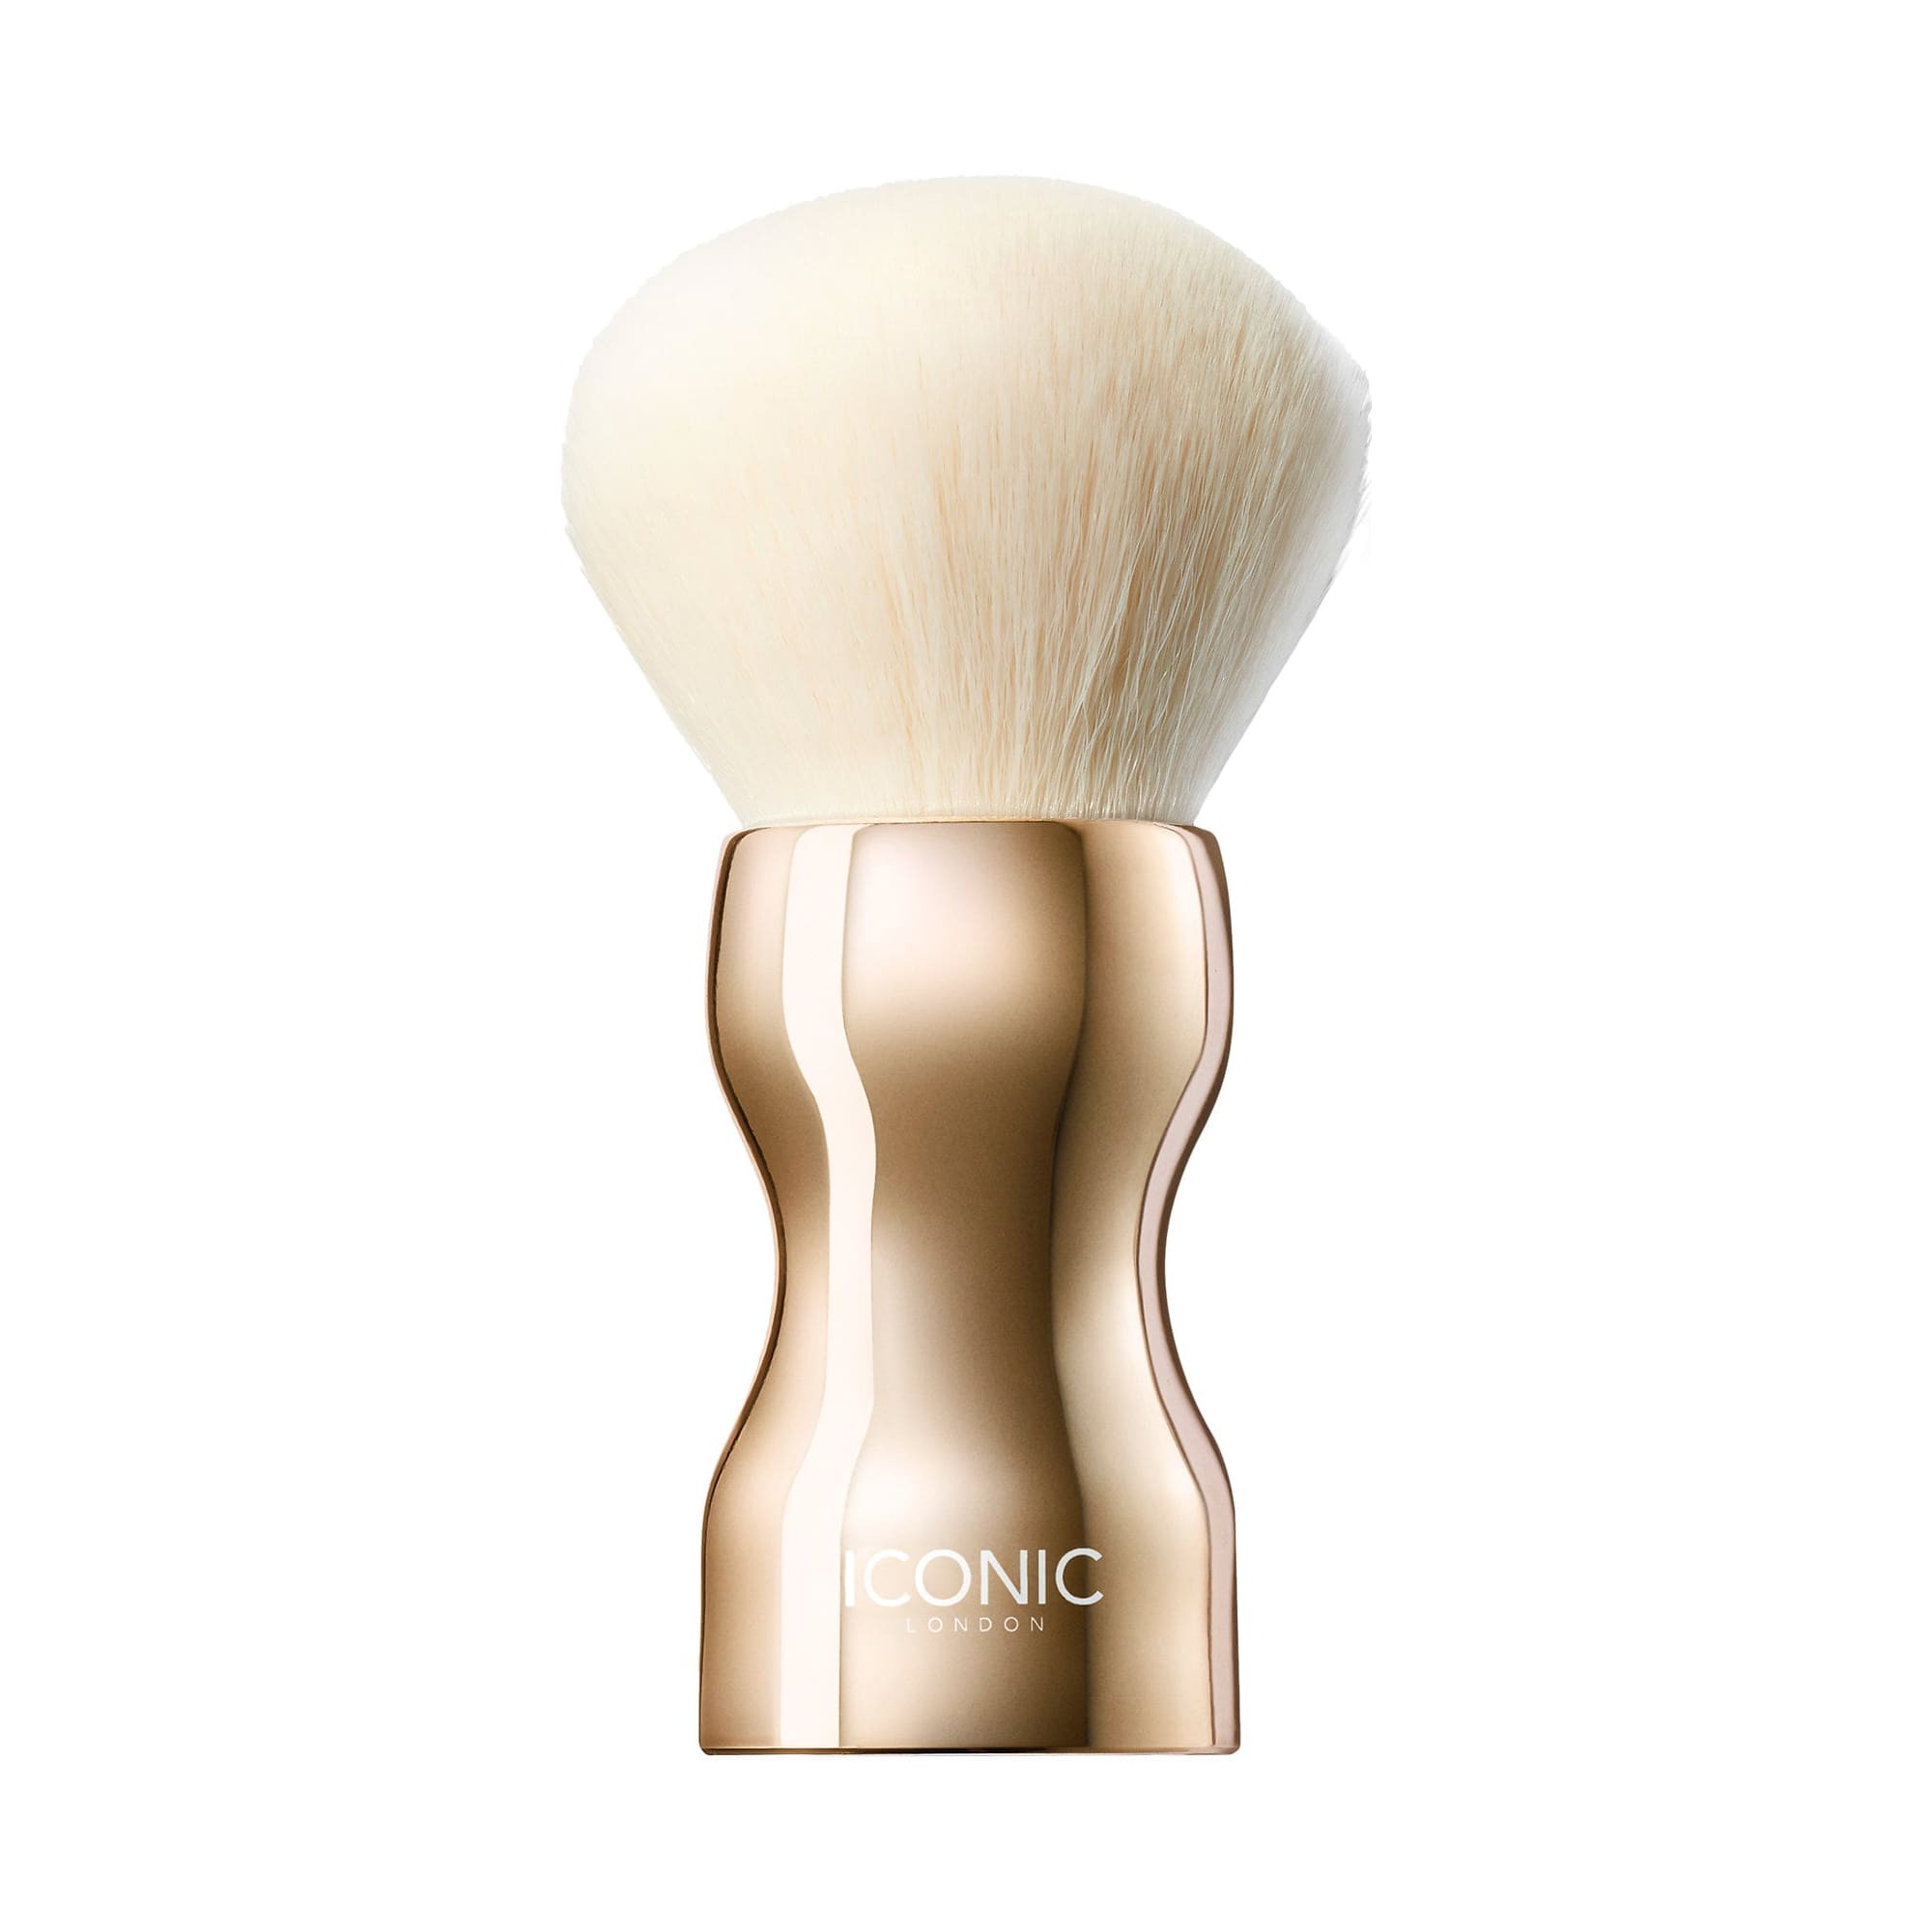 Iconic London Prep Set Tan Face and Body Brush